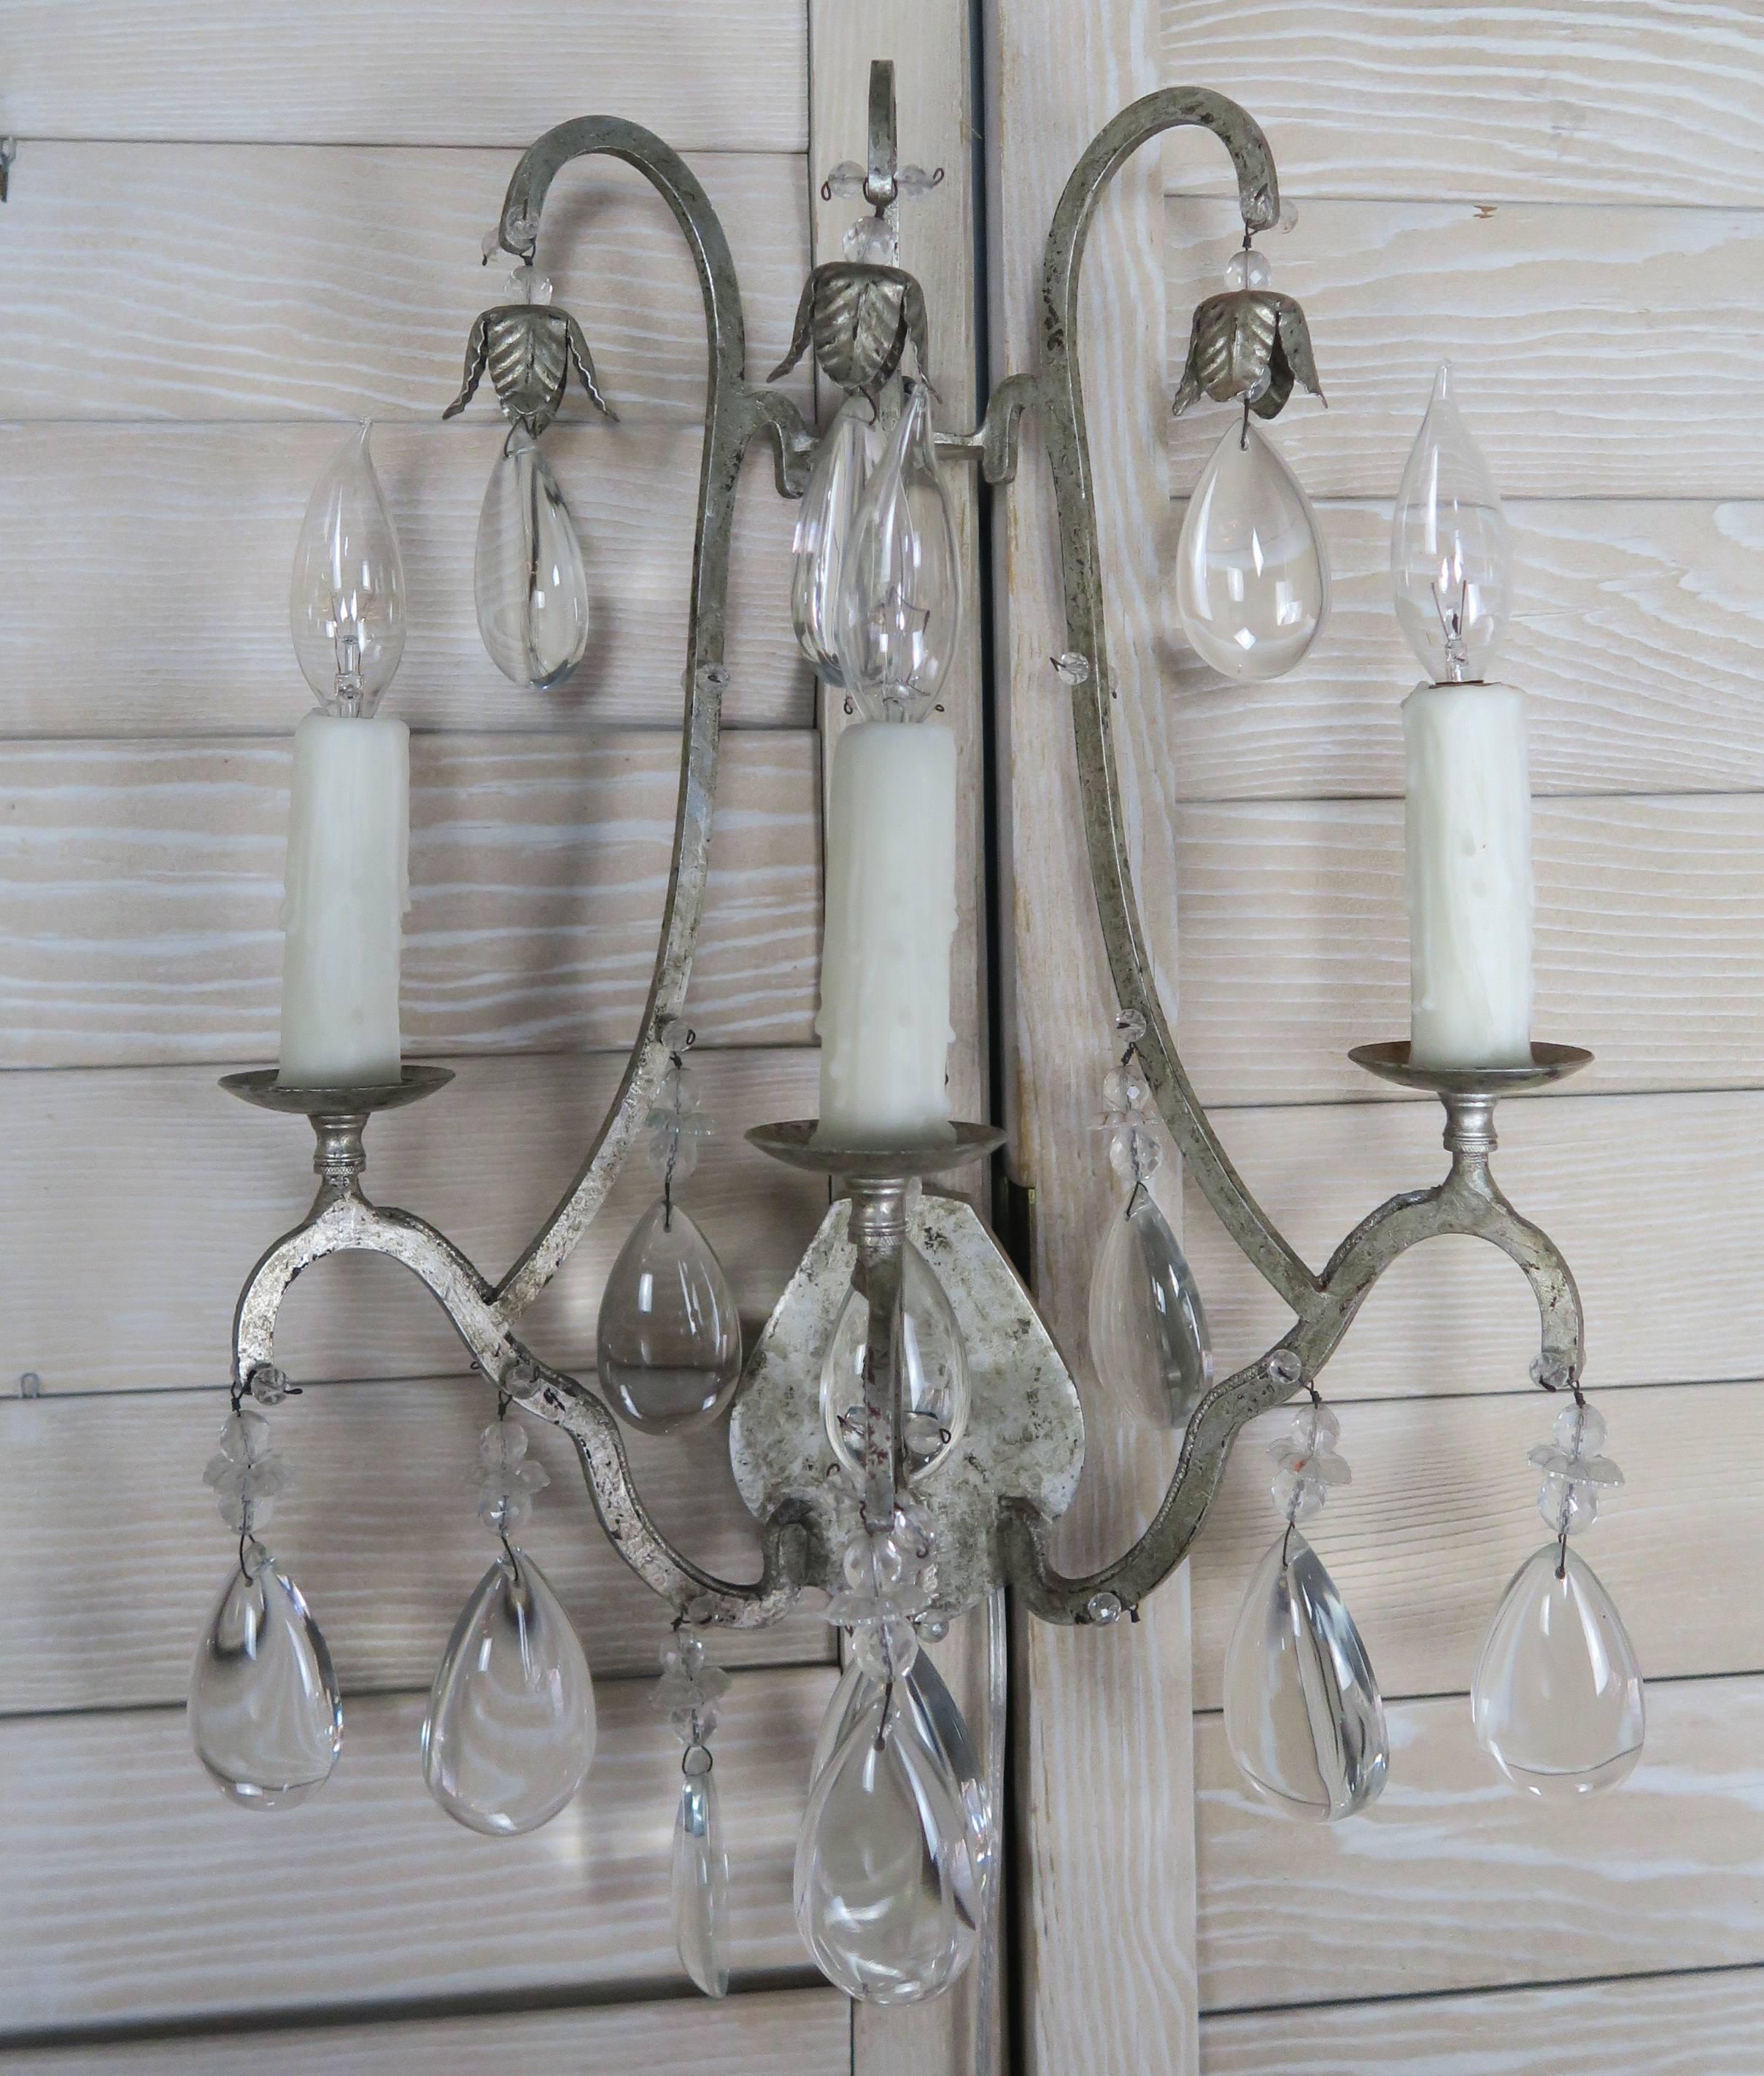 Pair of Italian silvered three-light sconces with smooth almond shaped crystals. The sconces have been newly wired with drip wax candle covers.